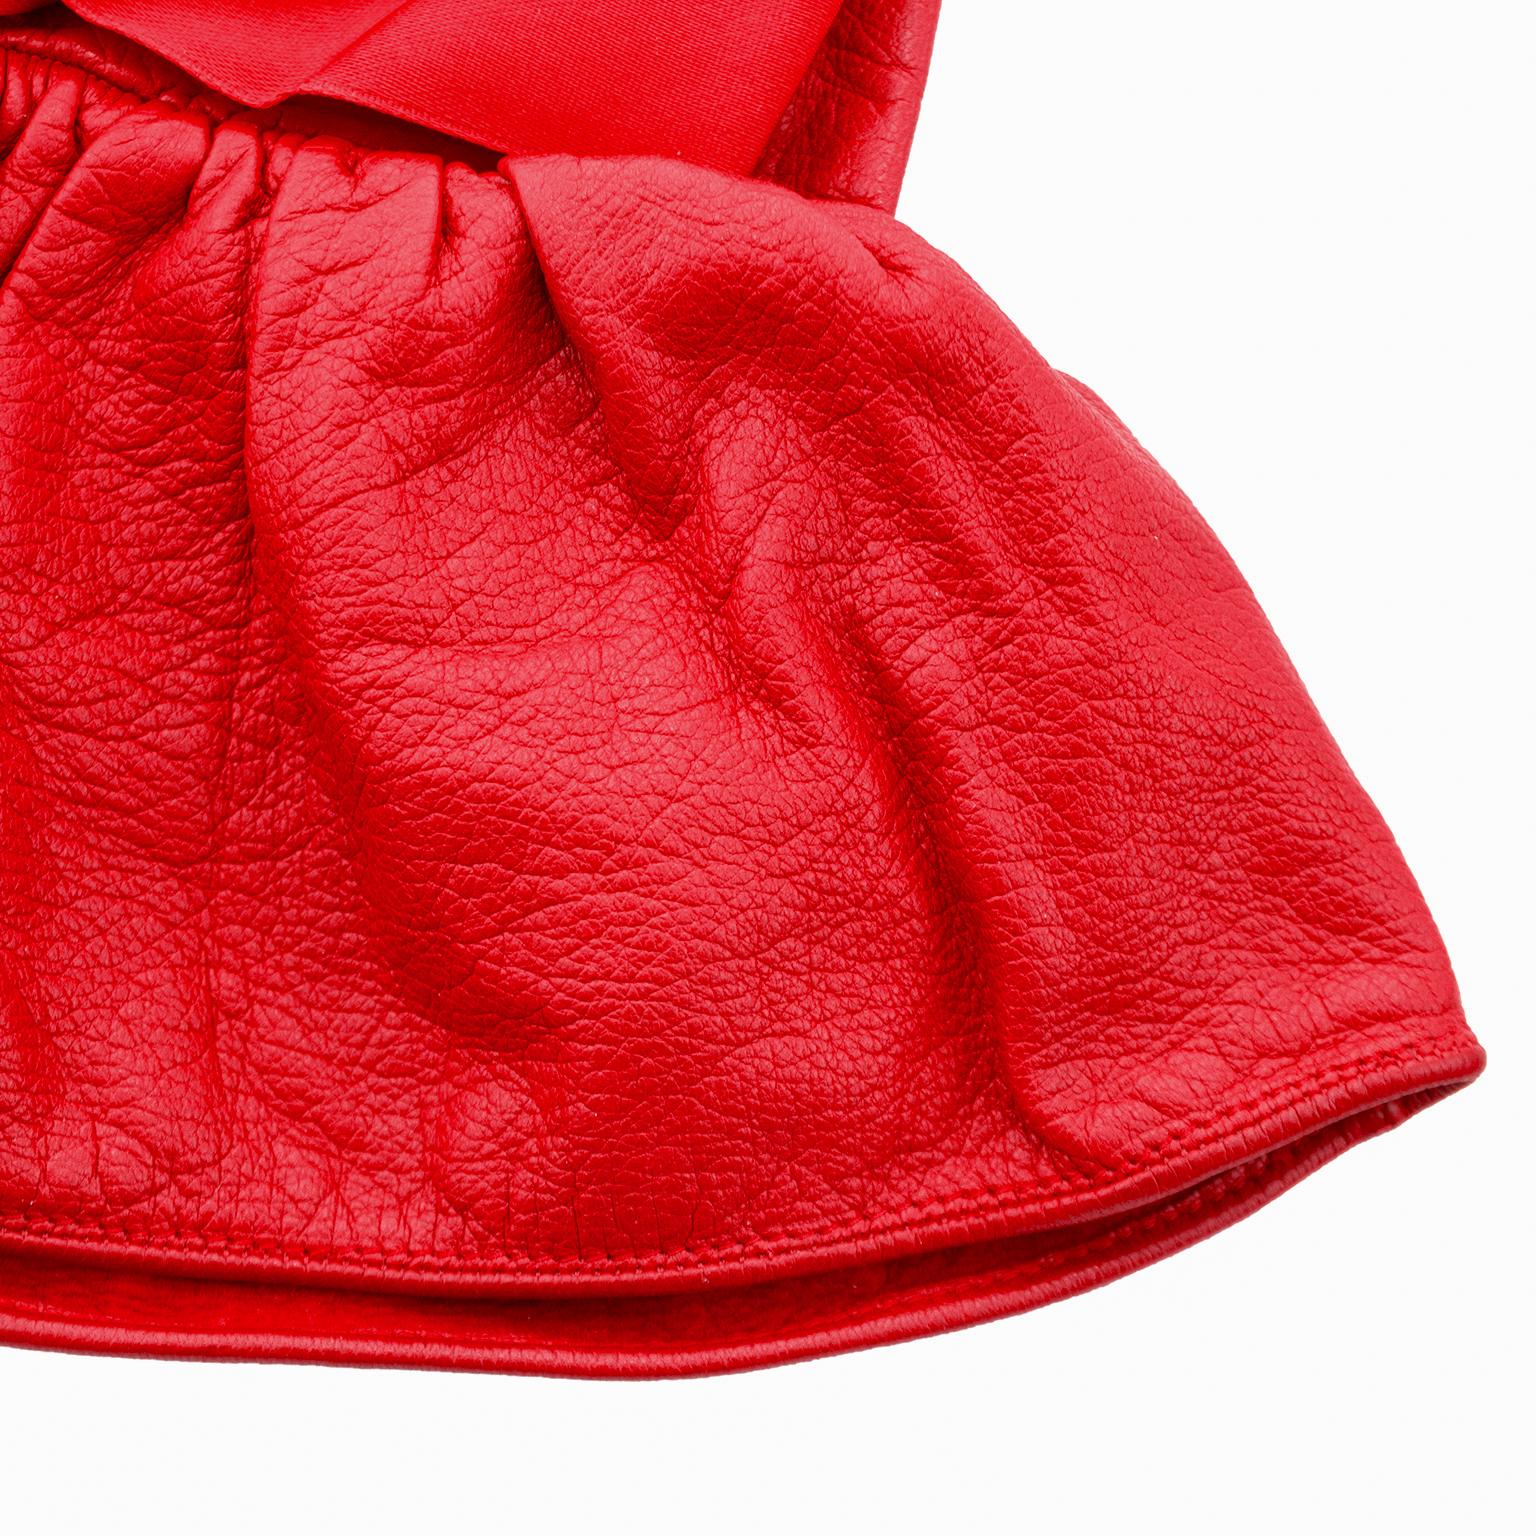 Women's 1990s Christian Dior Red Leather Gloves with Satin Bows 